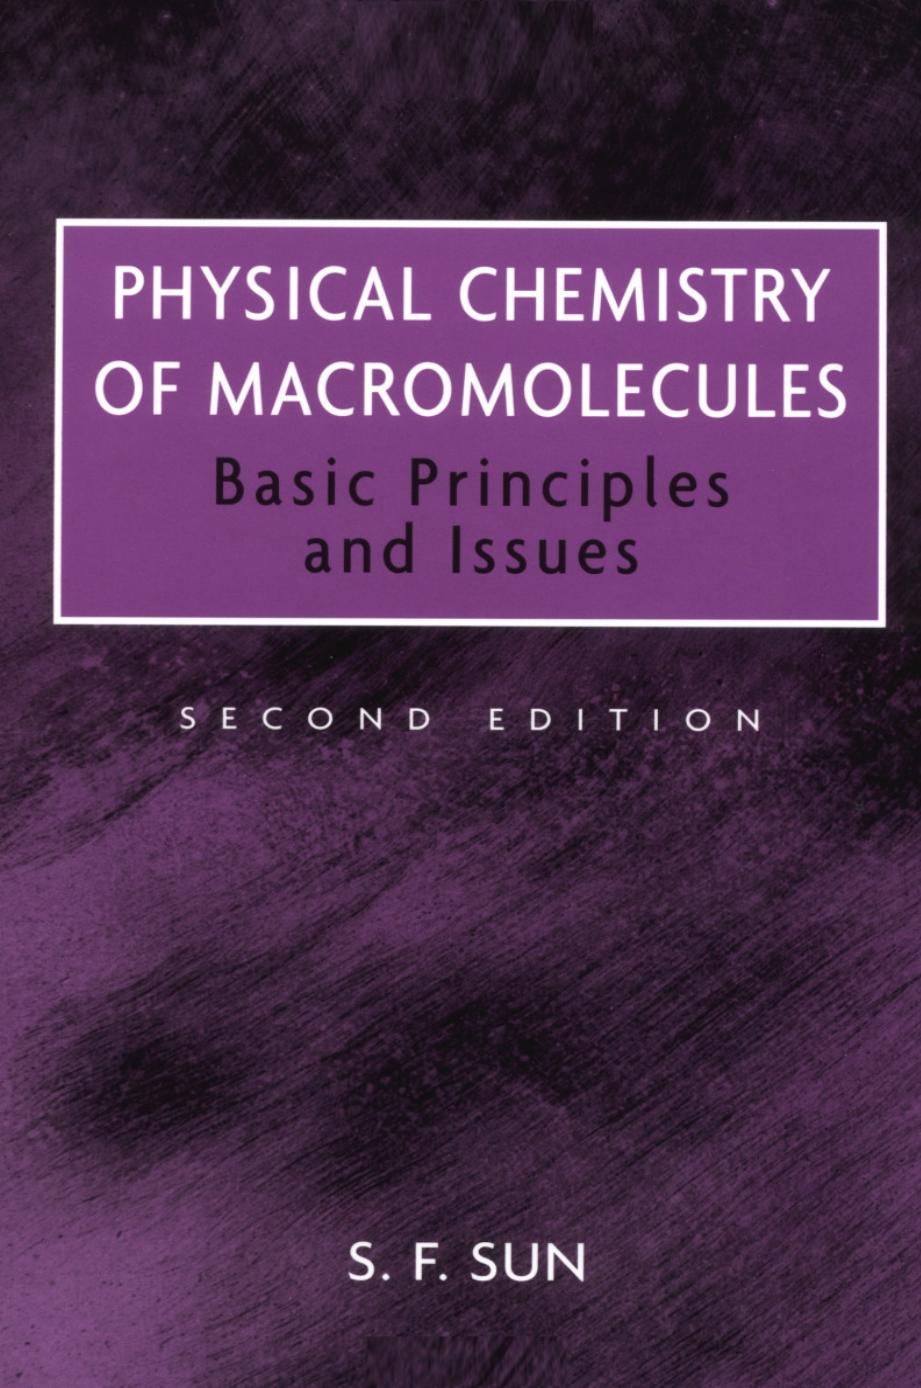 Physical Chemistry of Macromolecules: Basic Principles and Issues (Second Edition)